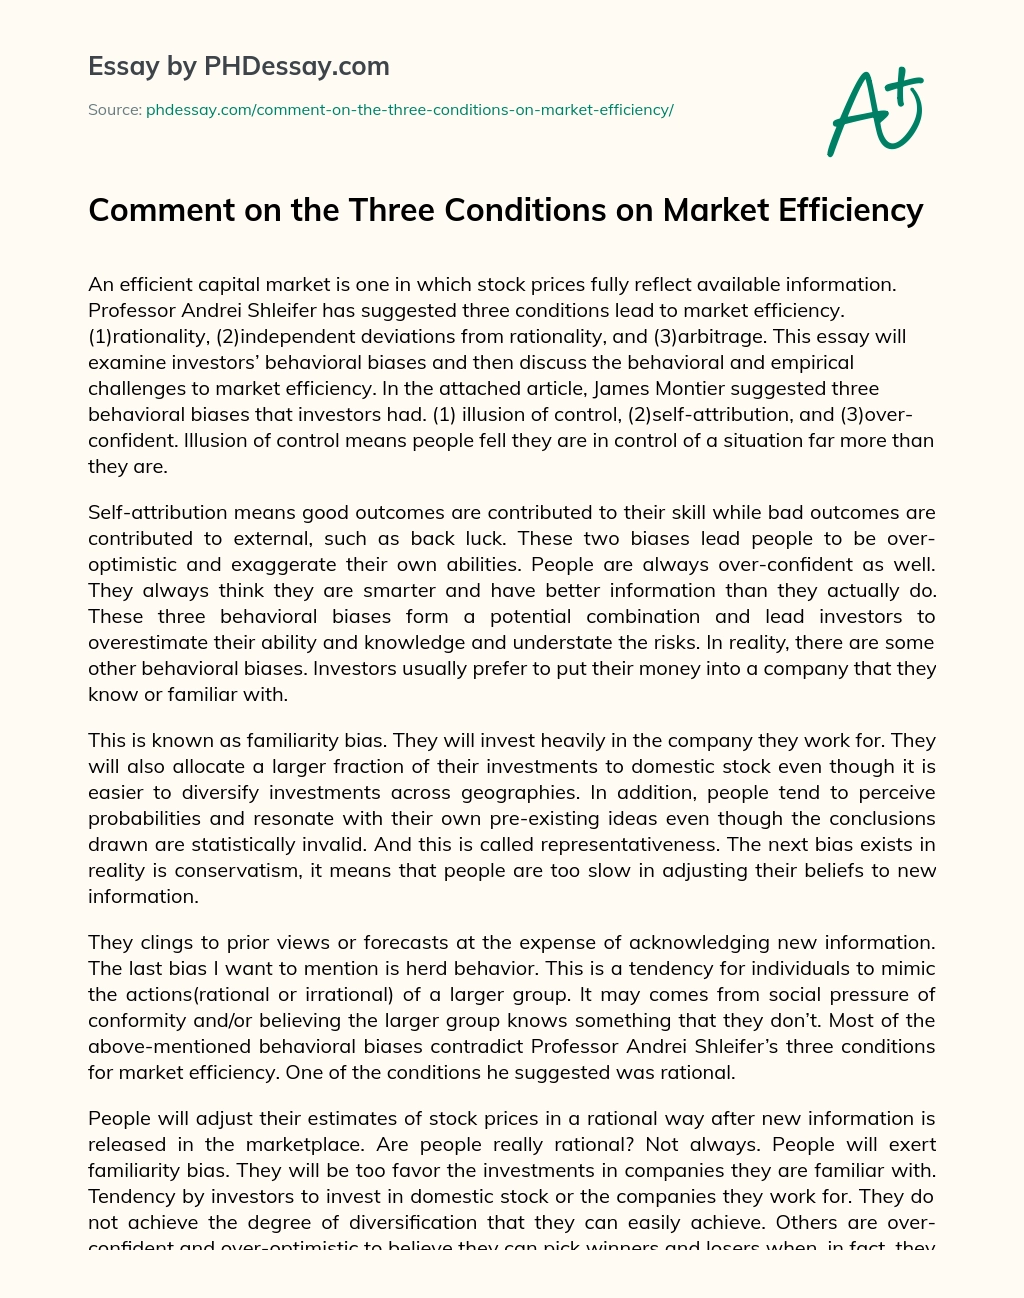 Comment on the Three Conditions on Market Efficiency essay